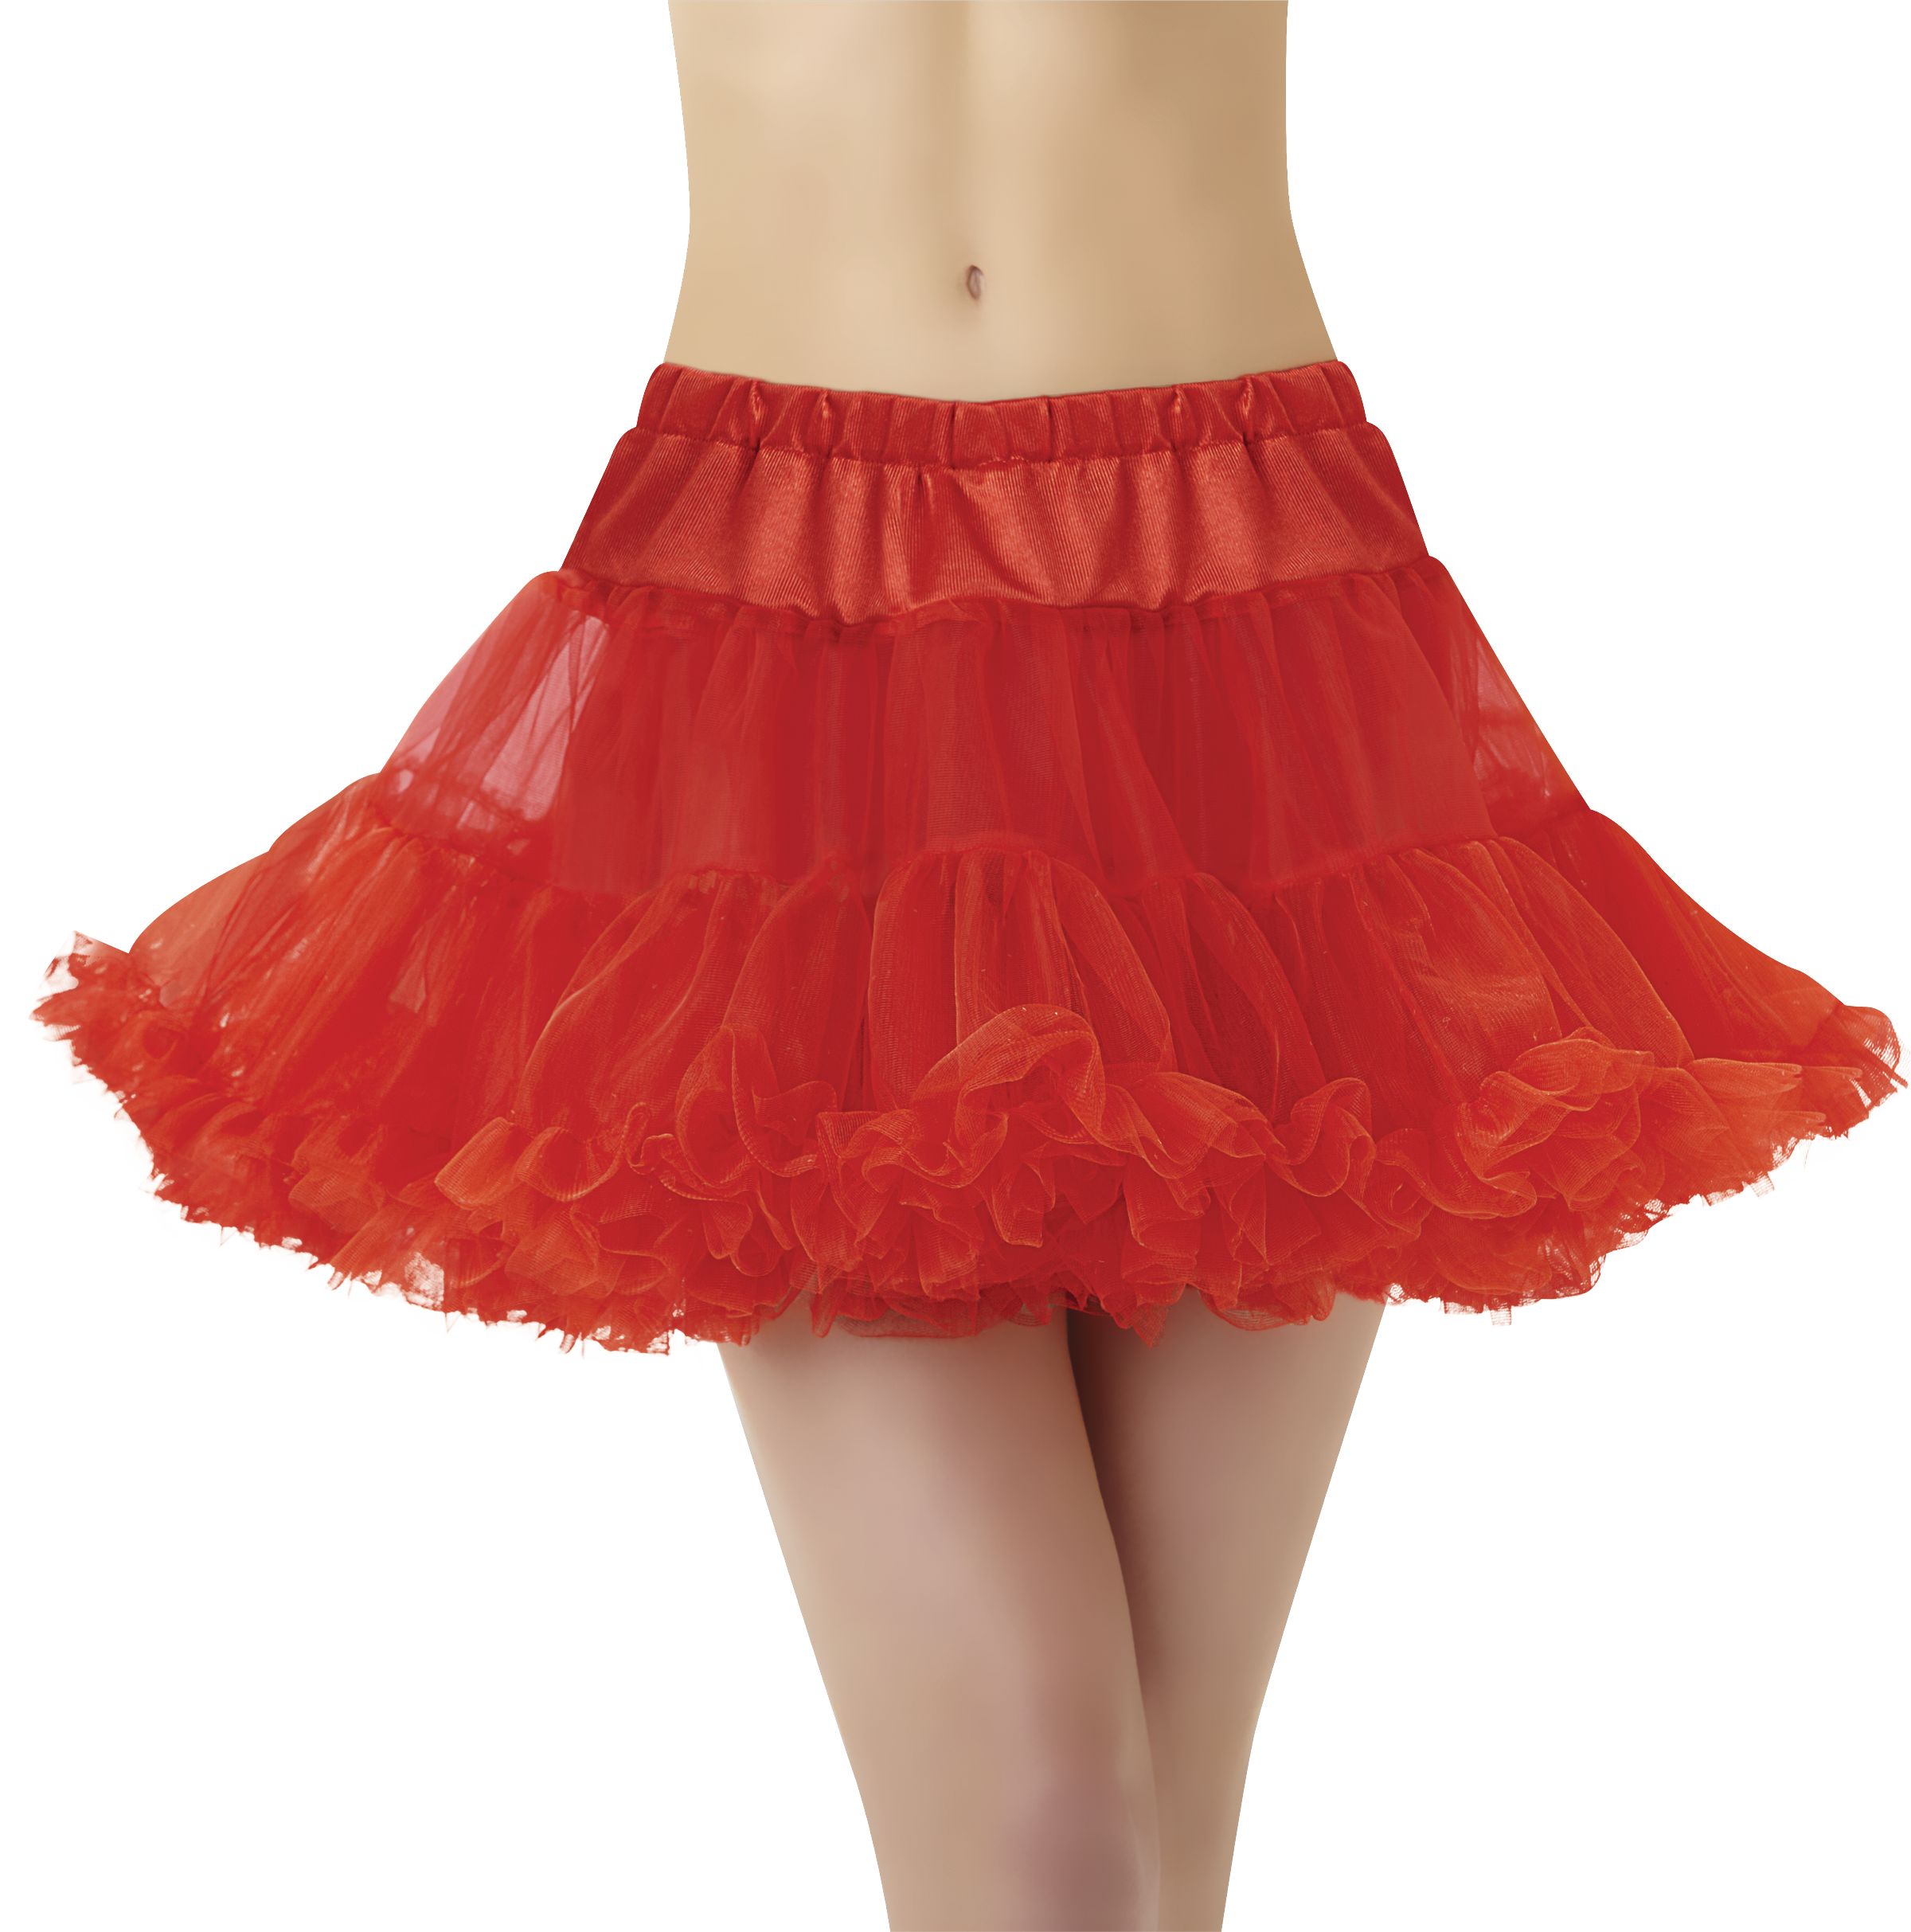 Adult Petticoat Tutu Tulle Skirt, Red, One Size, Wearable Costume Accessory  for Halloween